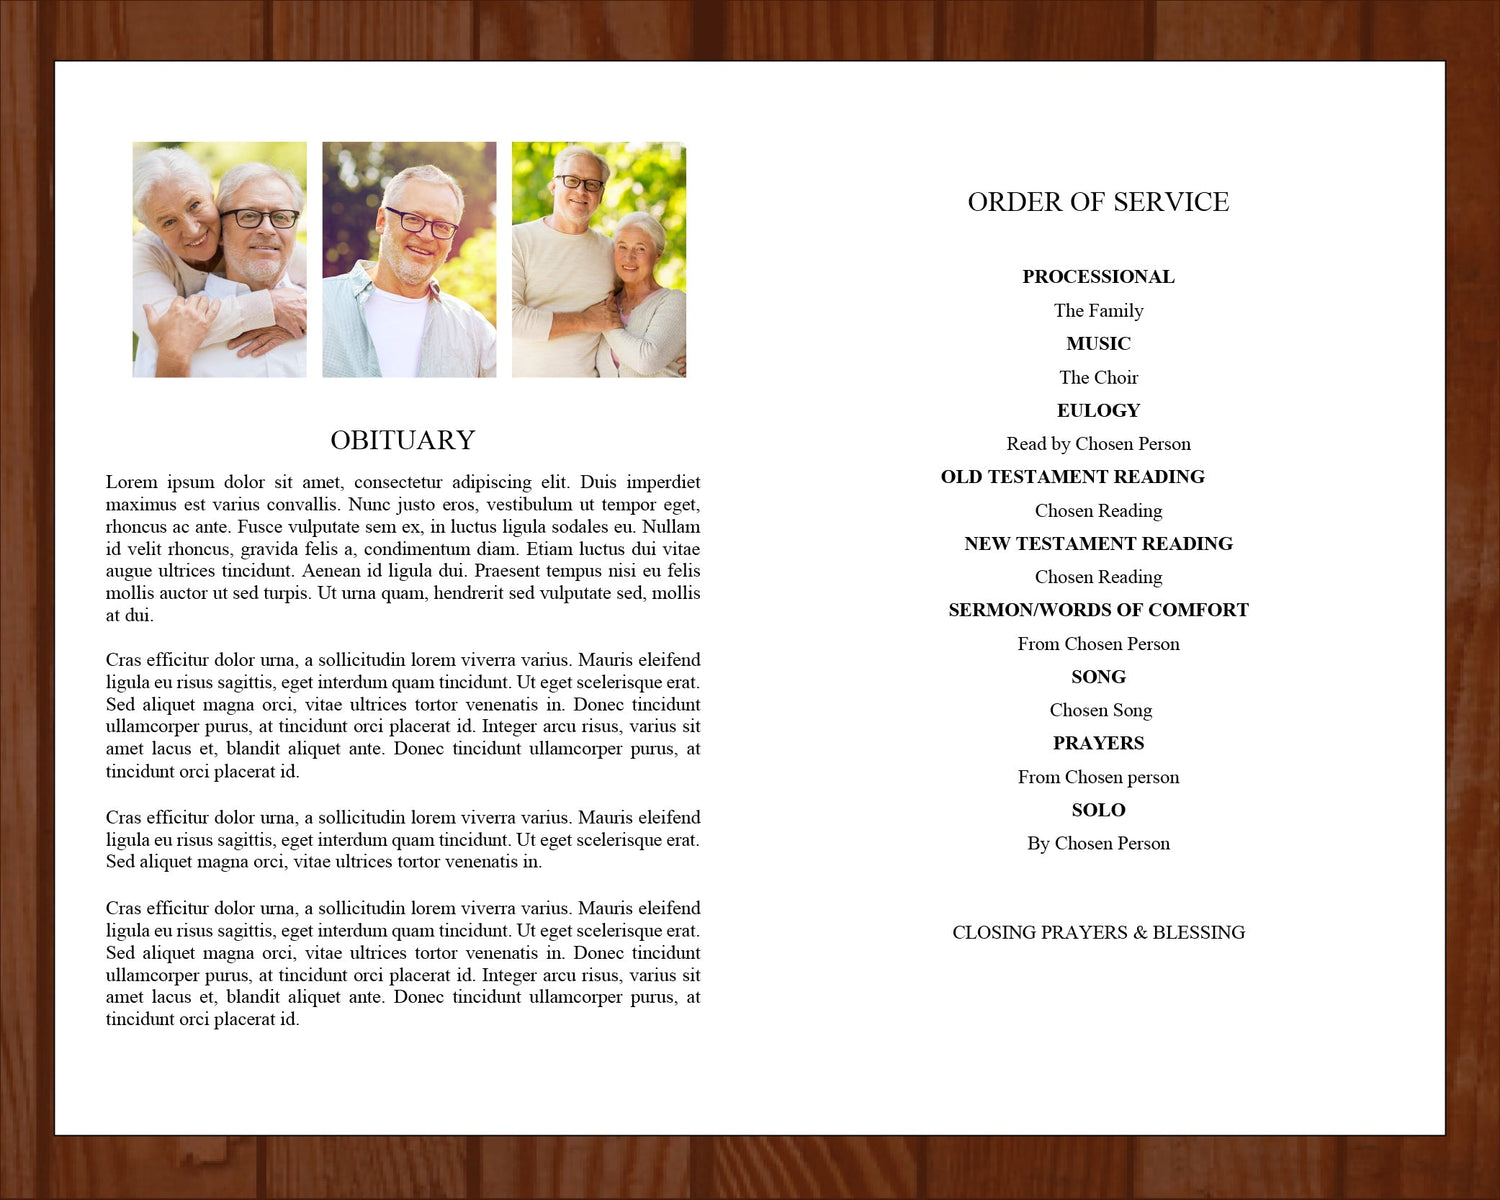 Top Three 4-Page Funeral Program Templates (Commercial Licenses)